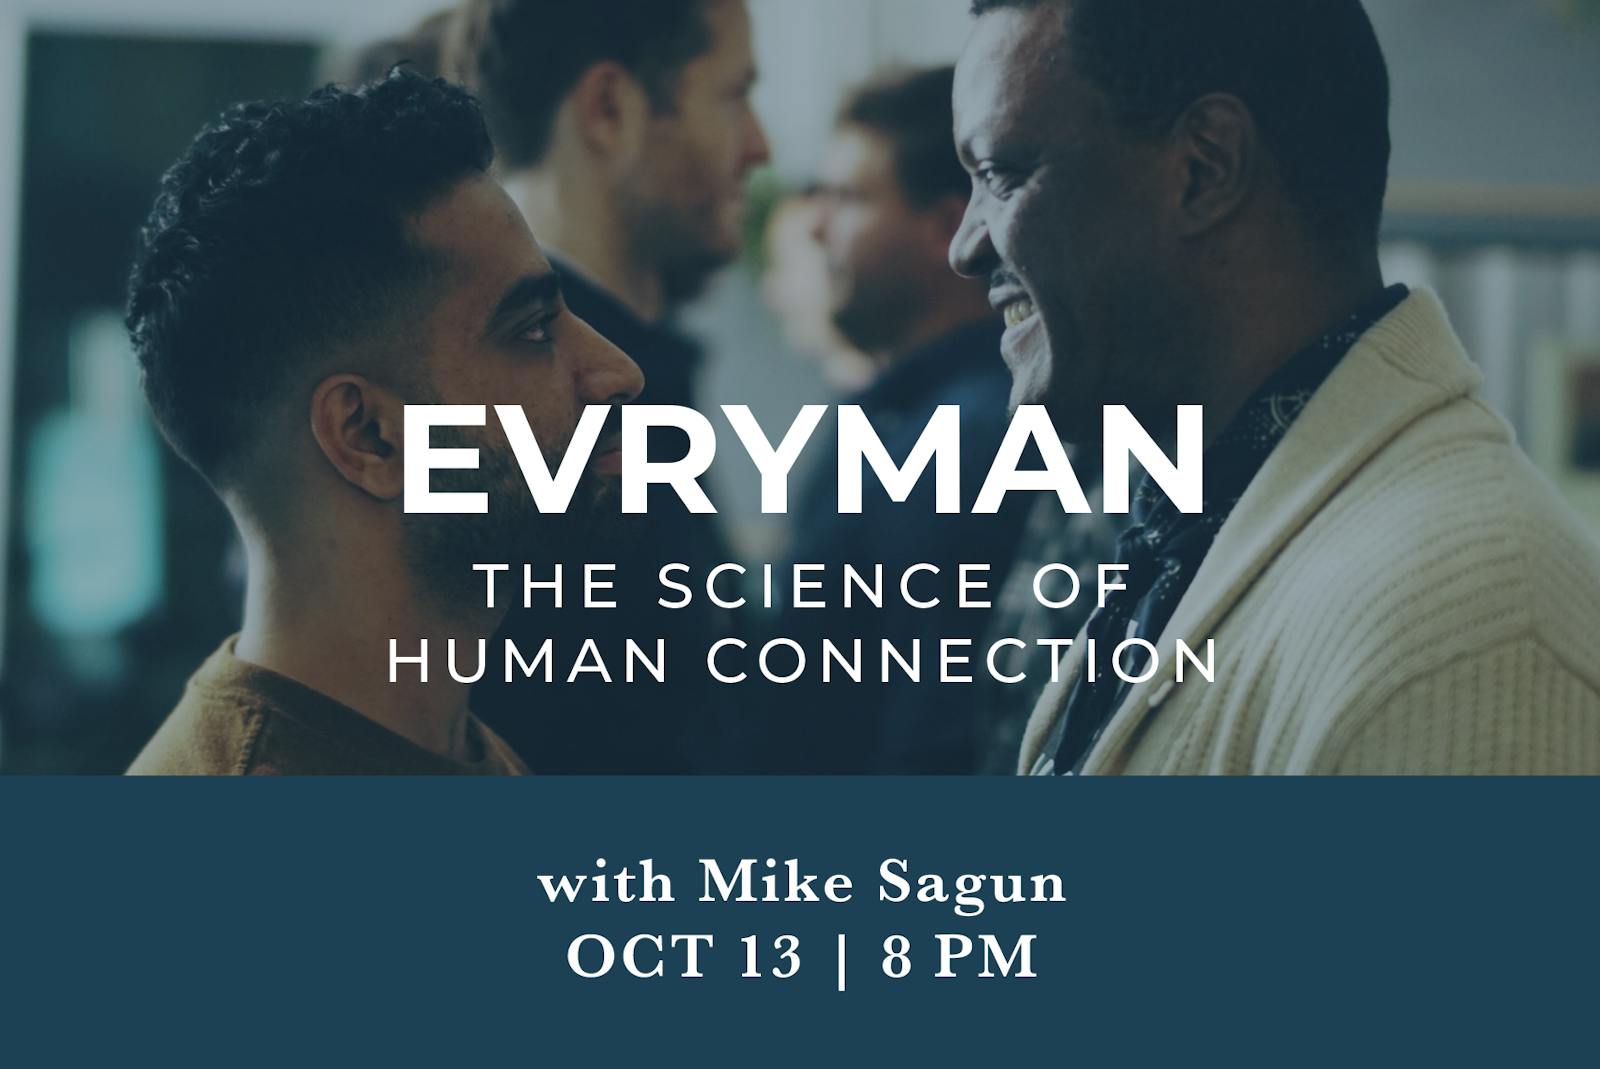 The Science of Human Connection - Free Webinar